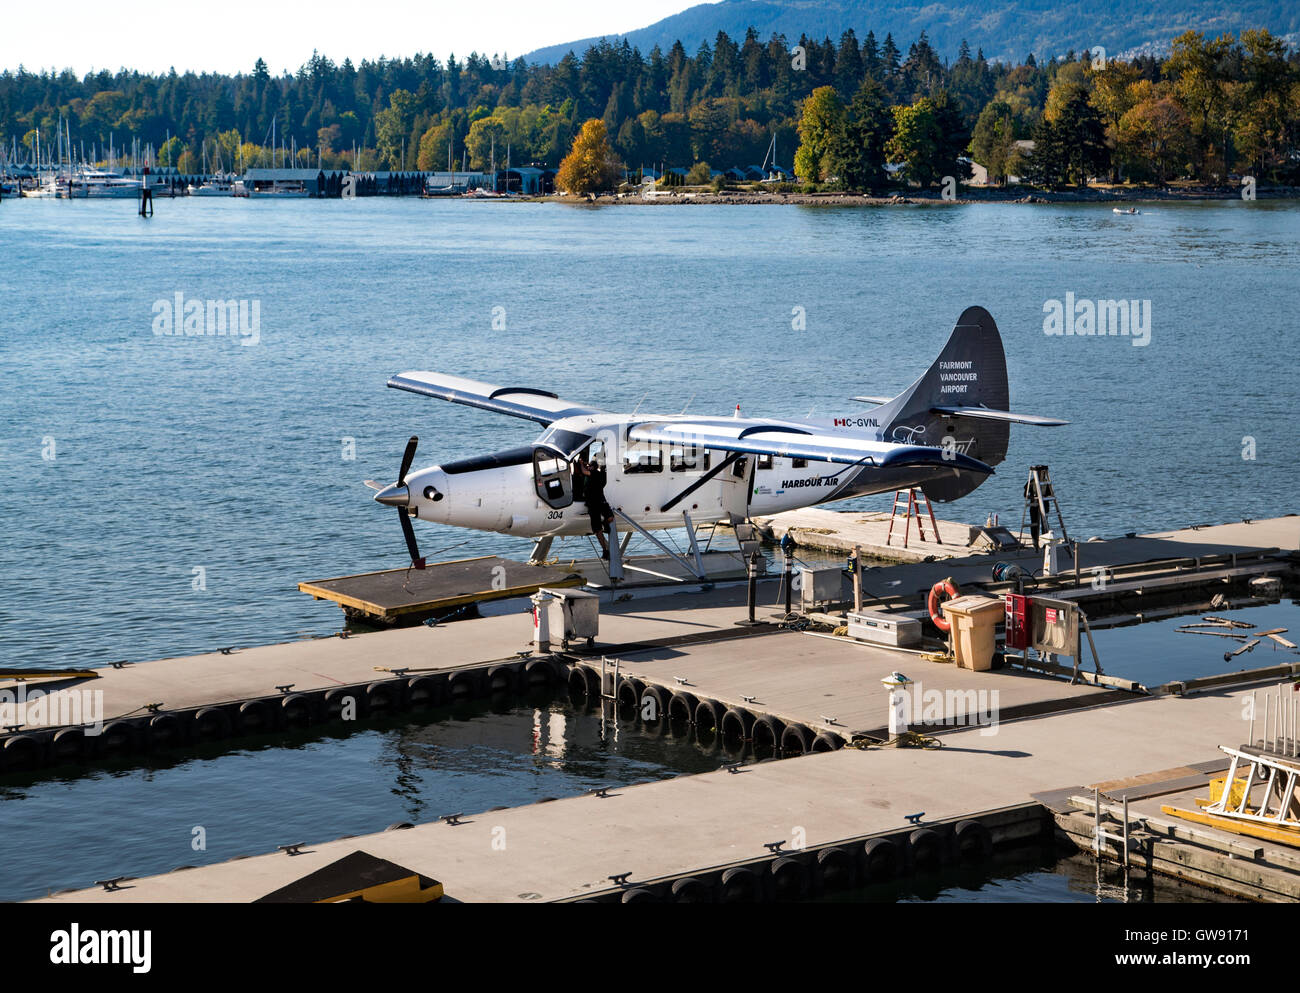 A De Havilland DHC-3 Otter Floatplane getting ready for take off in Vancouver, BC, Canada. Stock Photo